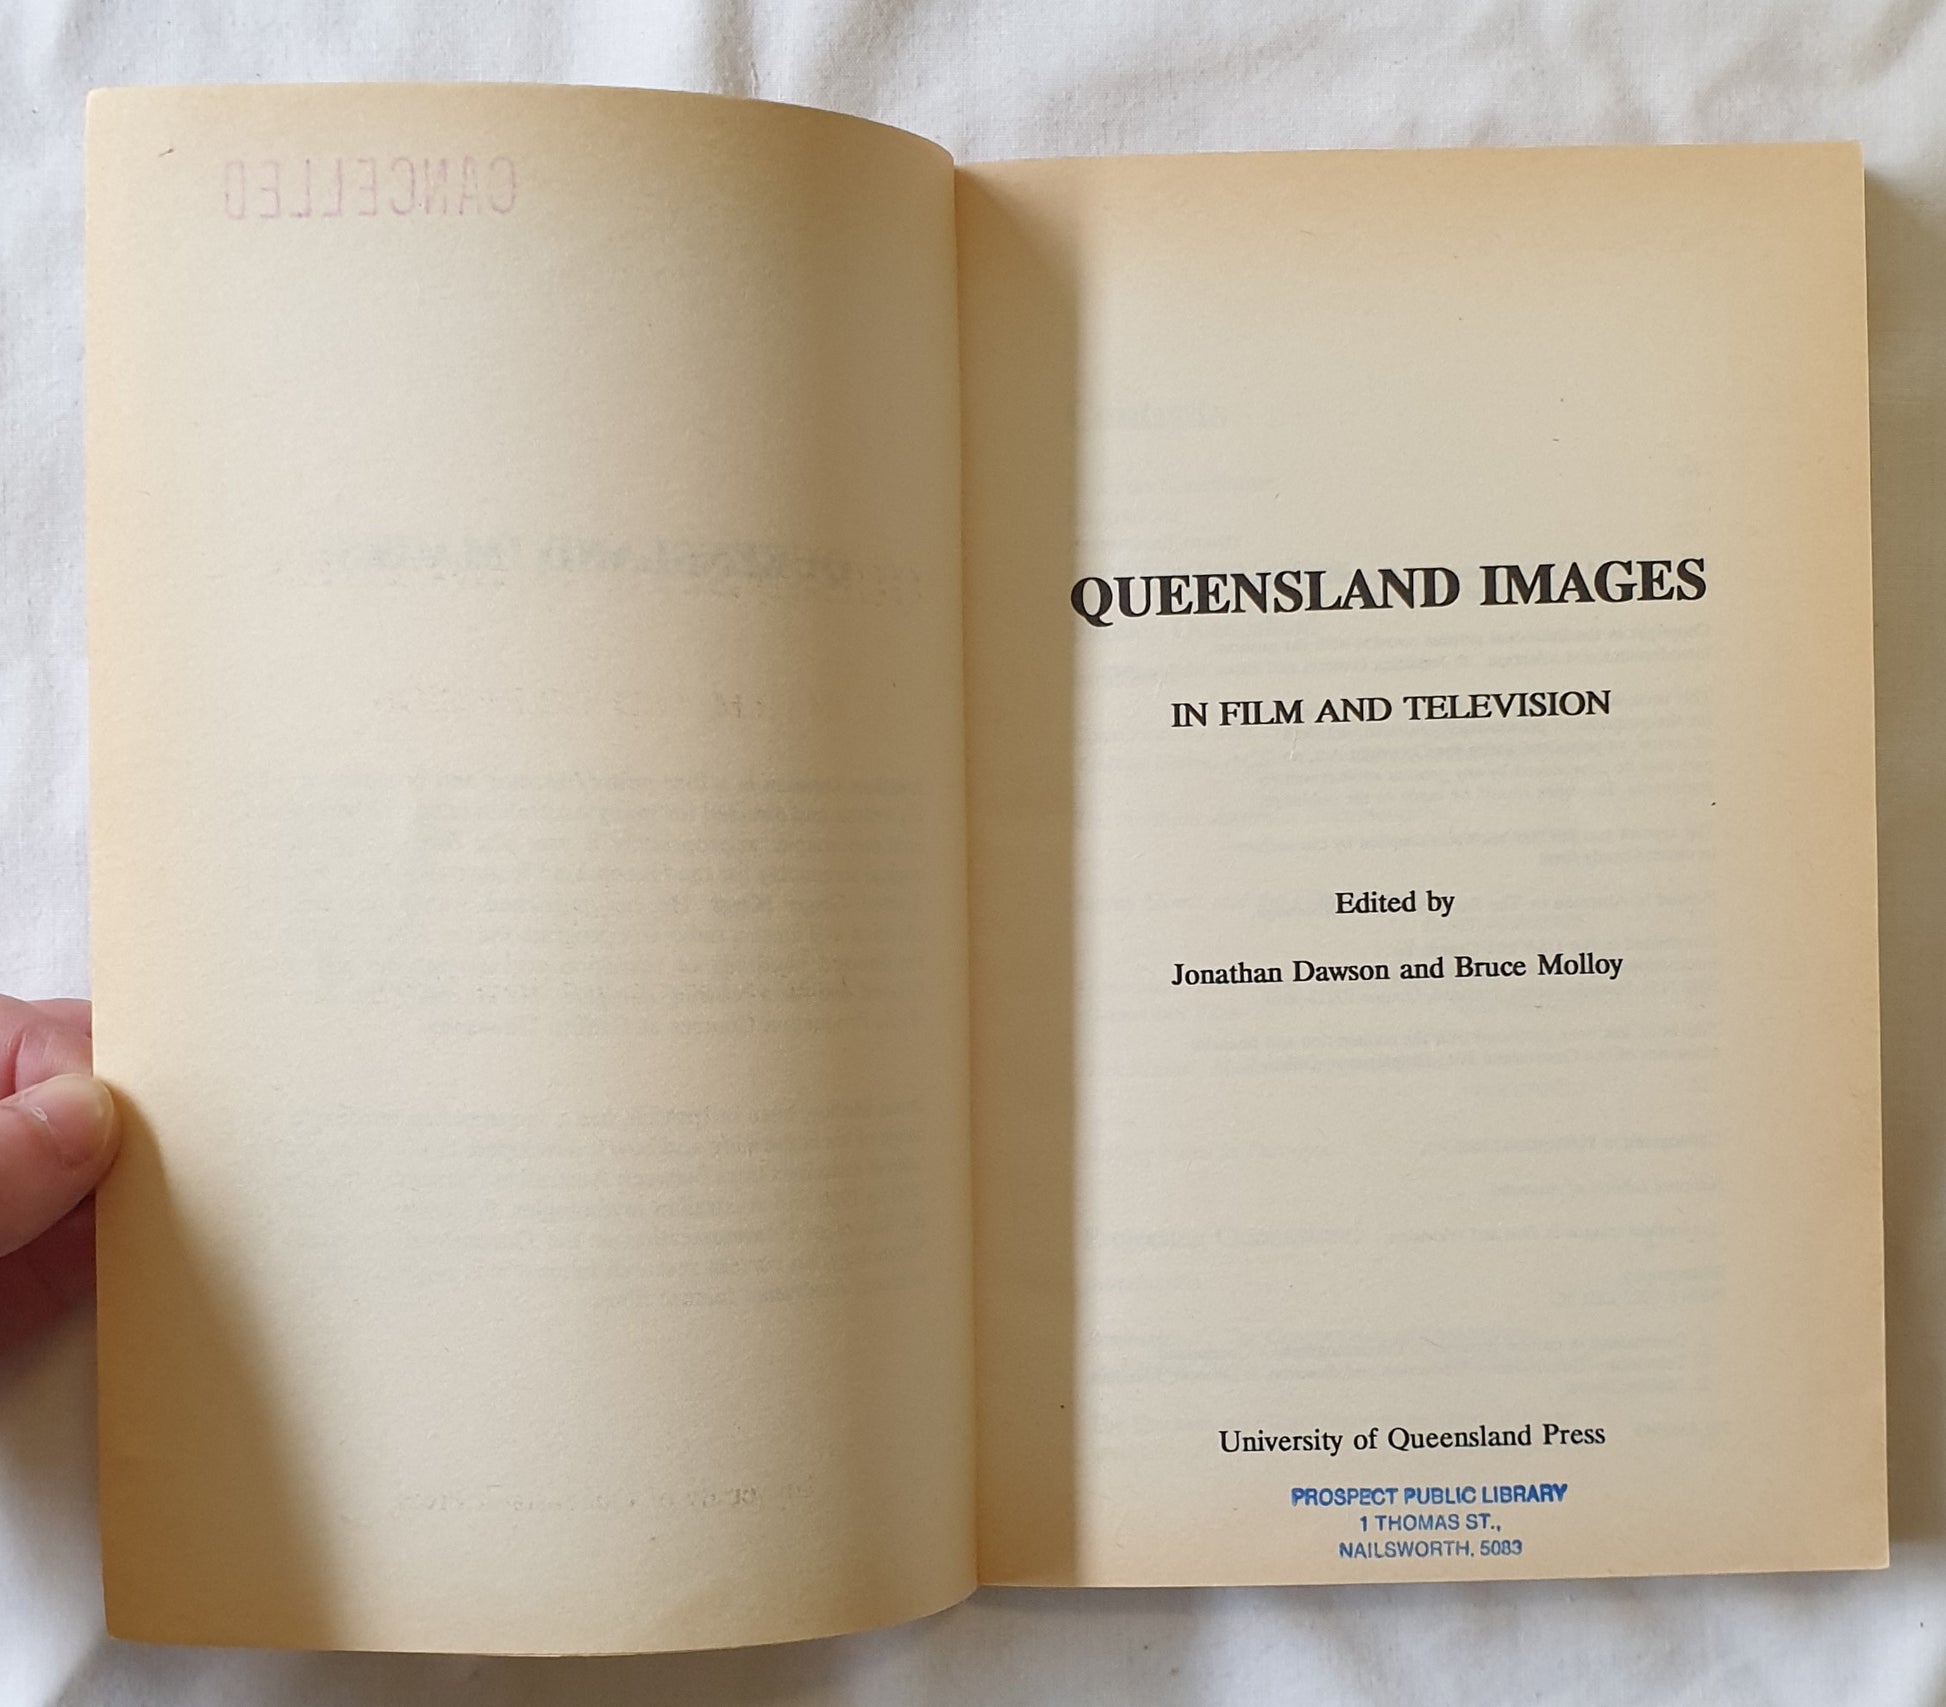 Queensland Images  In Film and Television  Edited by Jonathan Dawson and Bruce Molloy